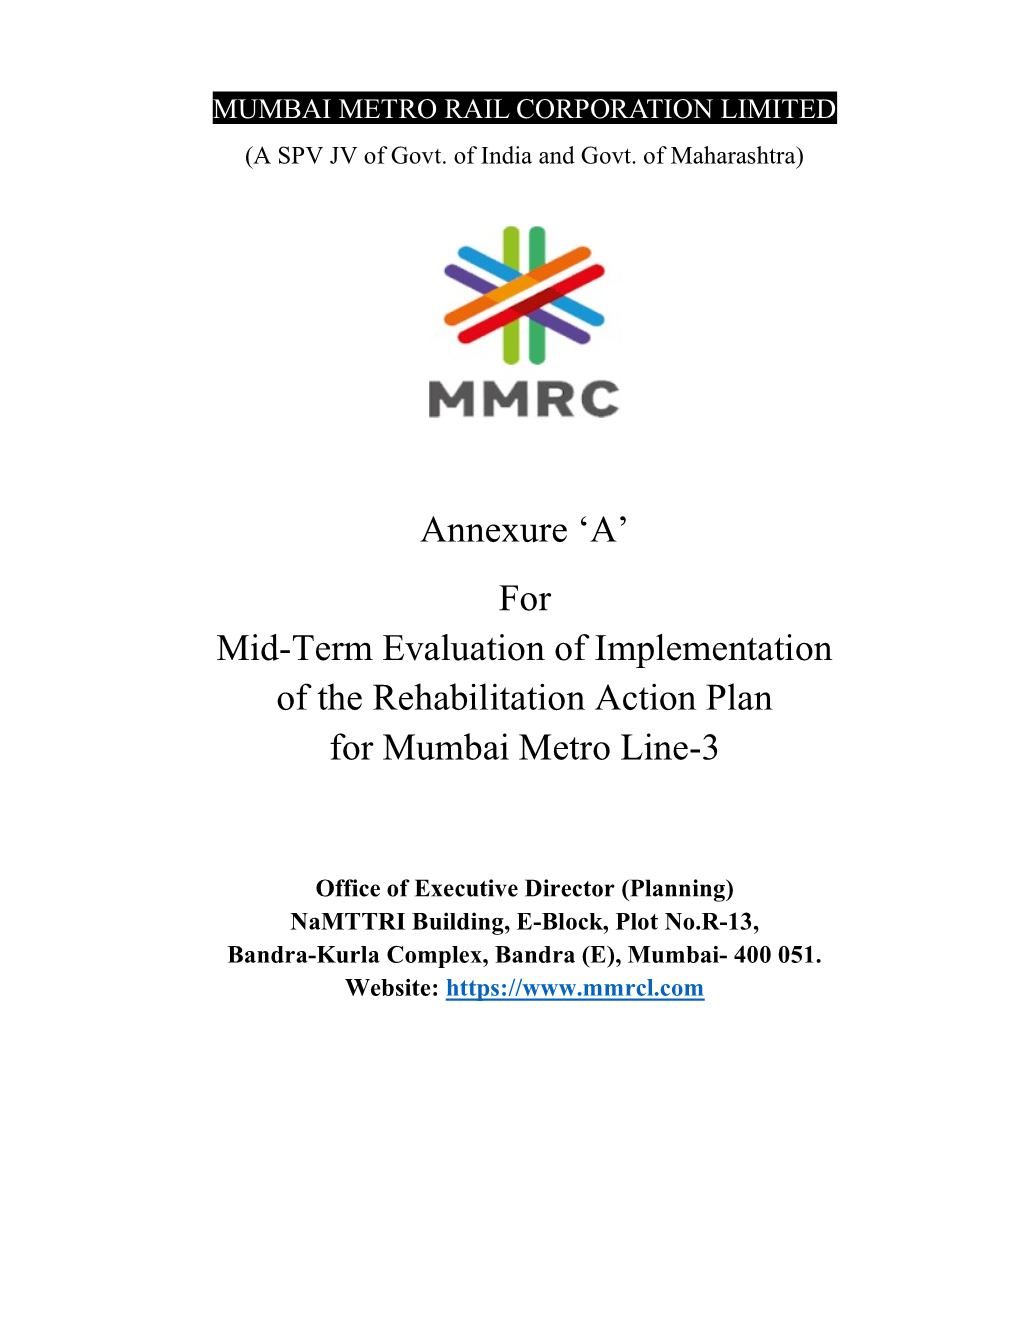 Annexure 'A' for Mid-Term Evaluation of Implementation of the Rehabilitation Action Plan for Mumbai Metro Line-3